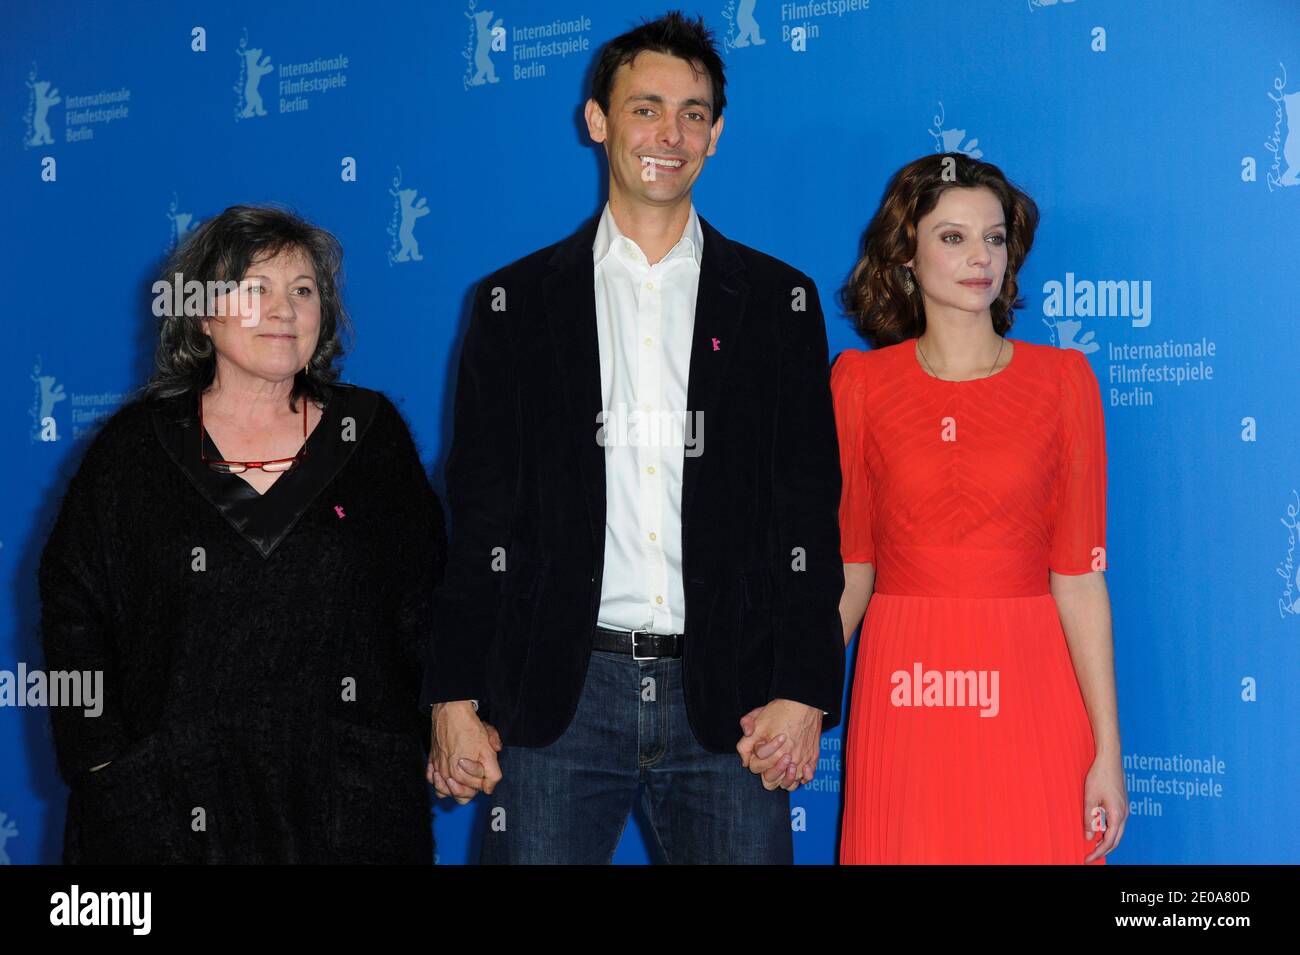 Actor Ivo Mueller, actress Teresa Madrugand actress Ana Moreira attend the 'Tabu' photocall for the 62nd Berlin International Film Festival, in Berlin, Germany, 14 February 2012. The 62nd Berlinale takes place from 09 to 19 February. Photo by Aurore Marechal/ABACAPRESS.COM Stock Photo